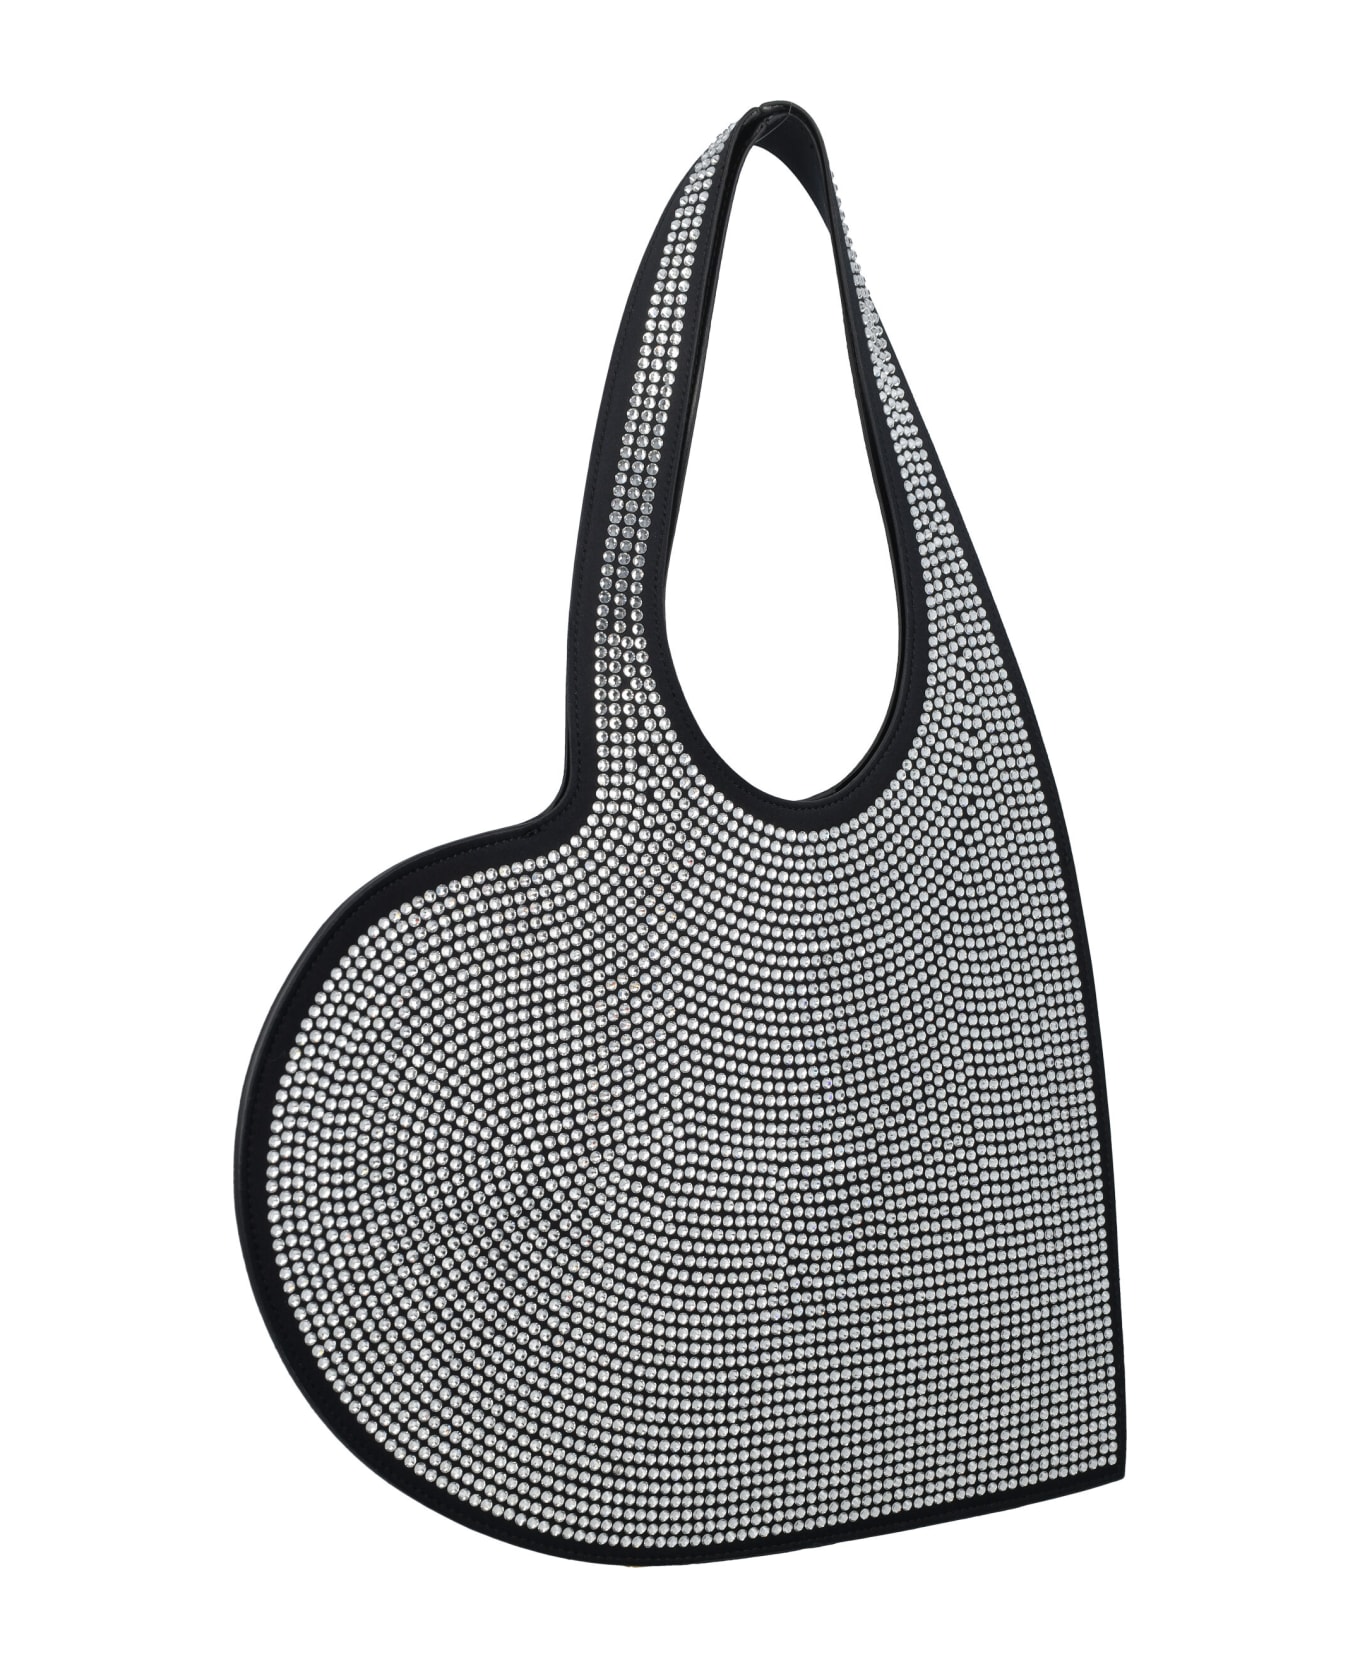 Coperni Heart Tote Bag With Crystals - BLACK SILVER CRYSTAL トートバッグ